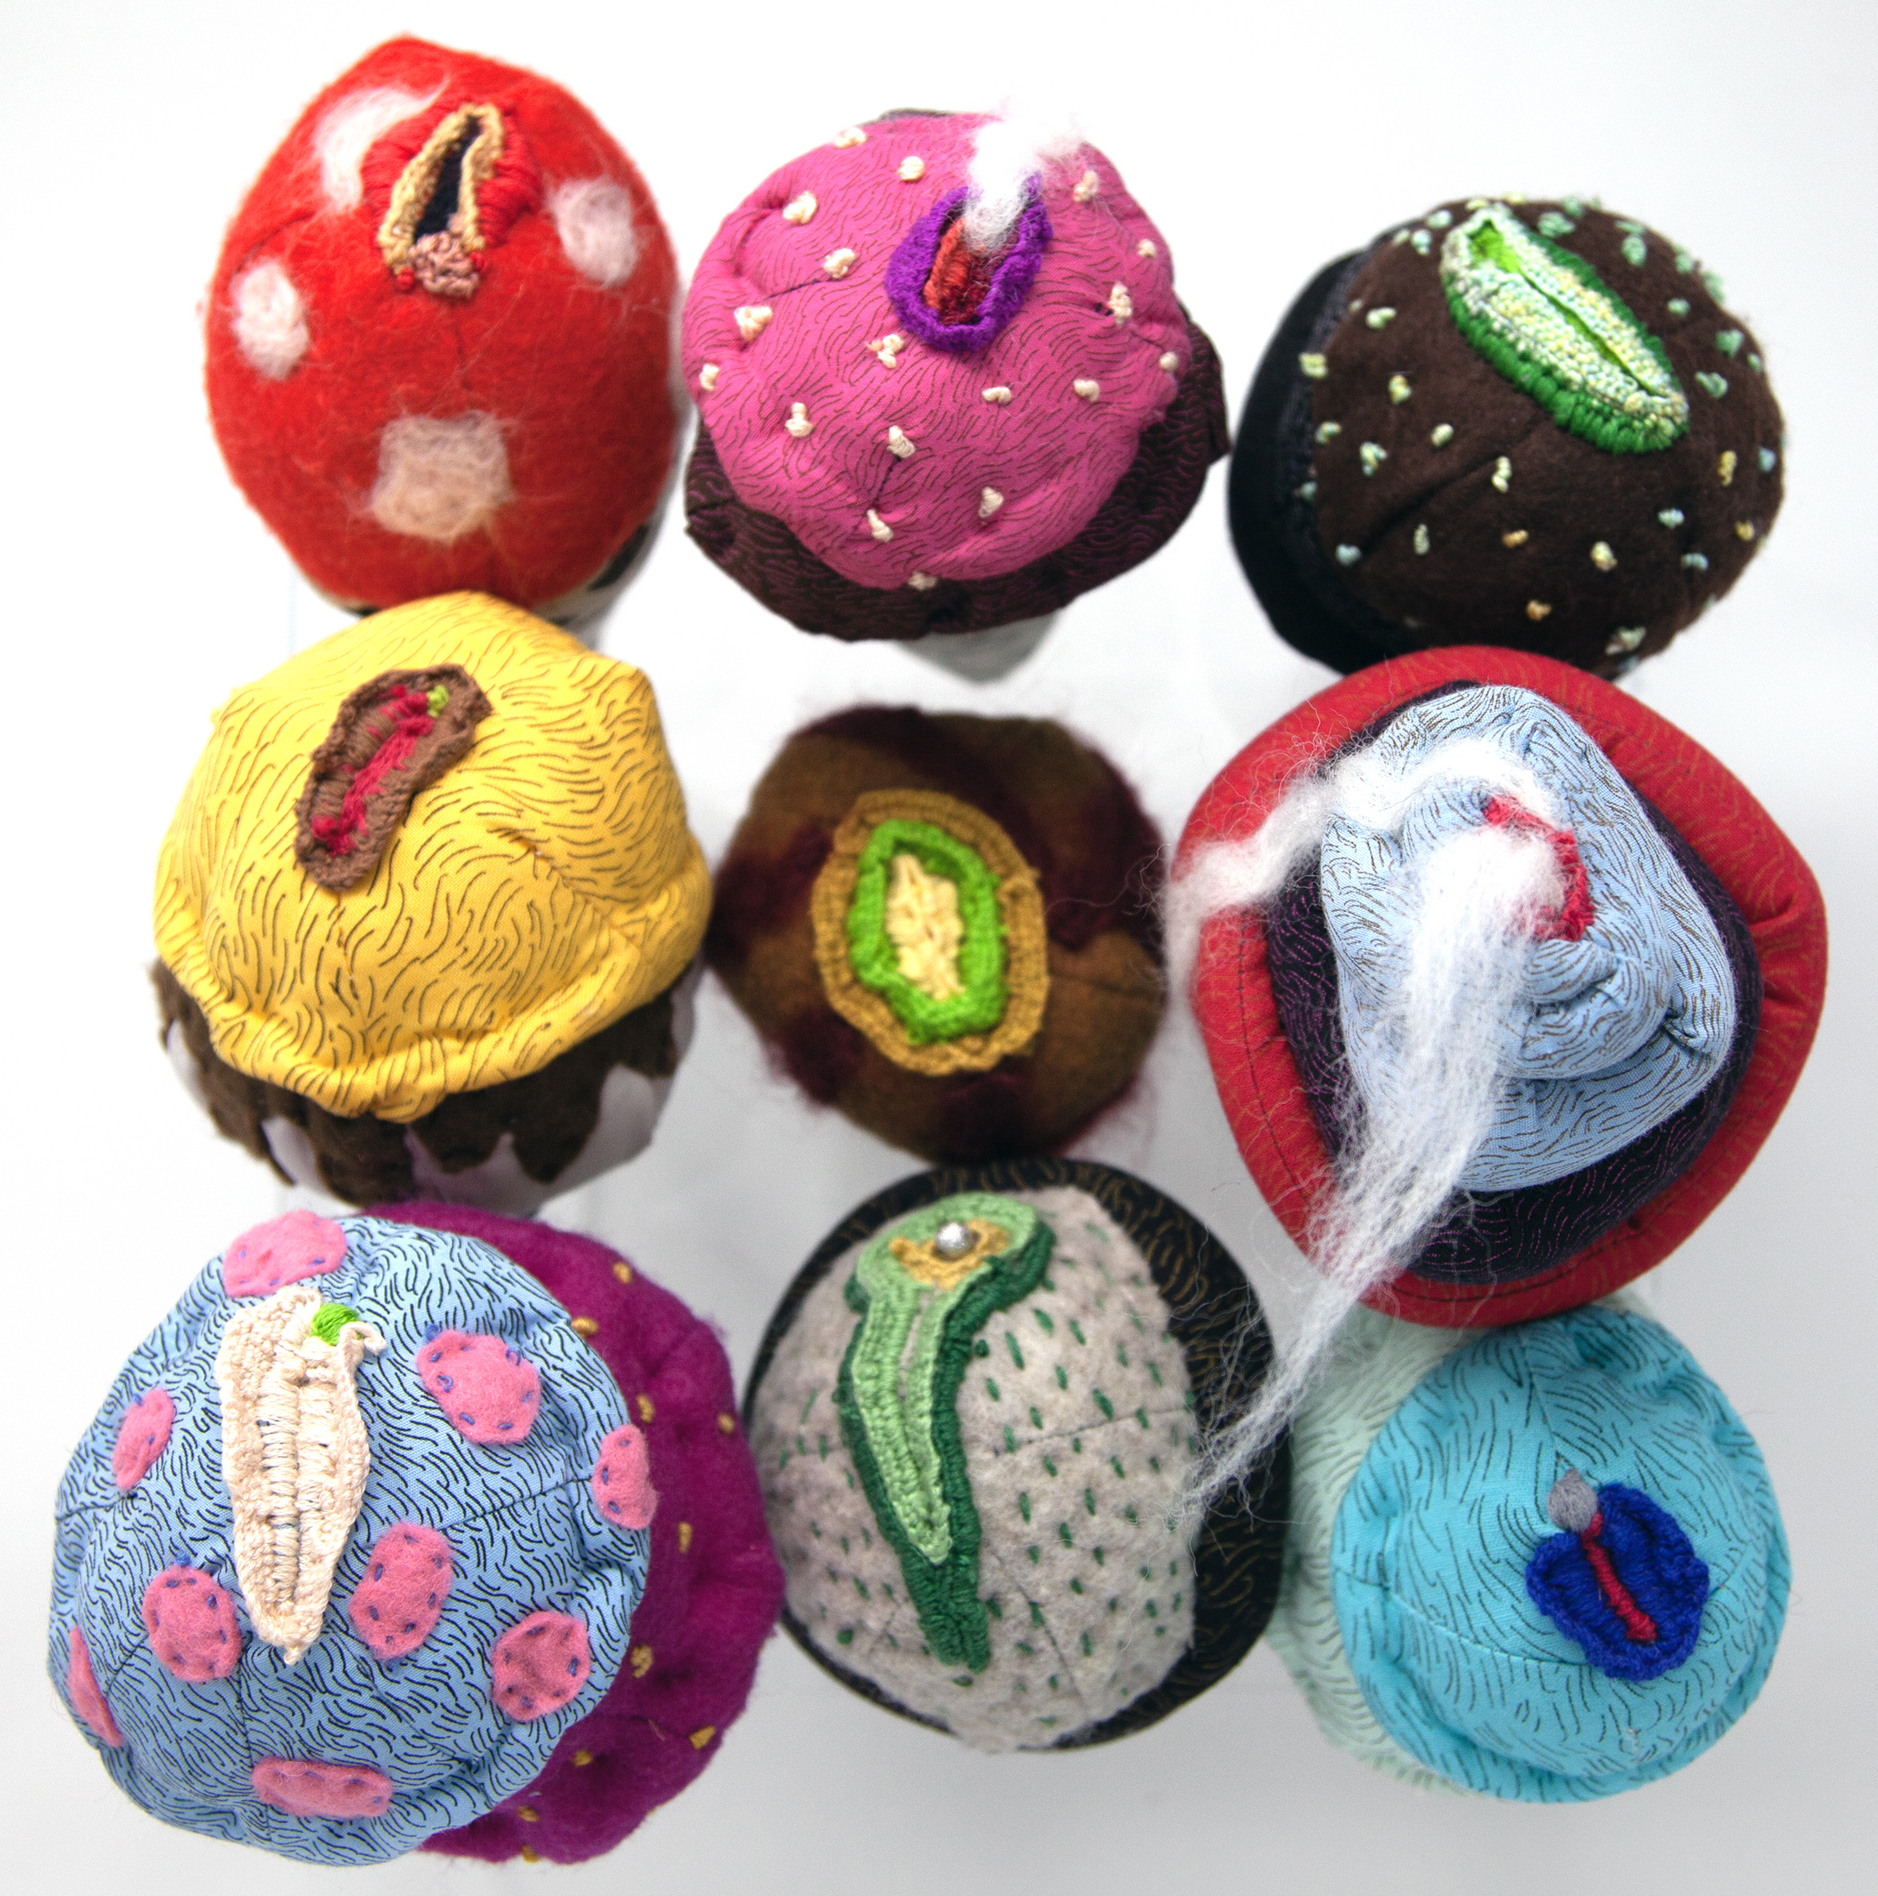 Nine soft-sculpture ice cream cones alluding to vaginas and made of various fabrics, pompoms, beads and accessories. Some of the fabrics are screen printed with patterns.